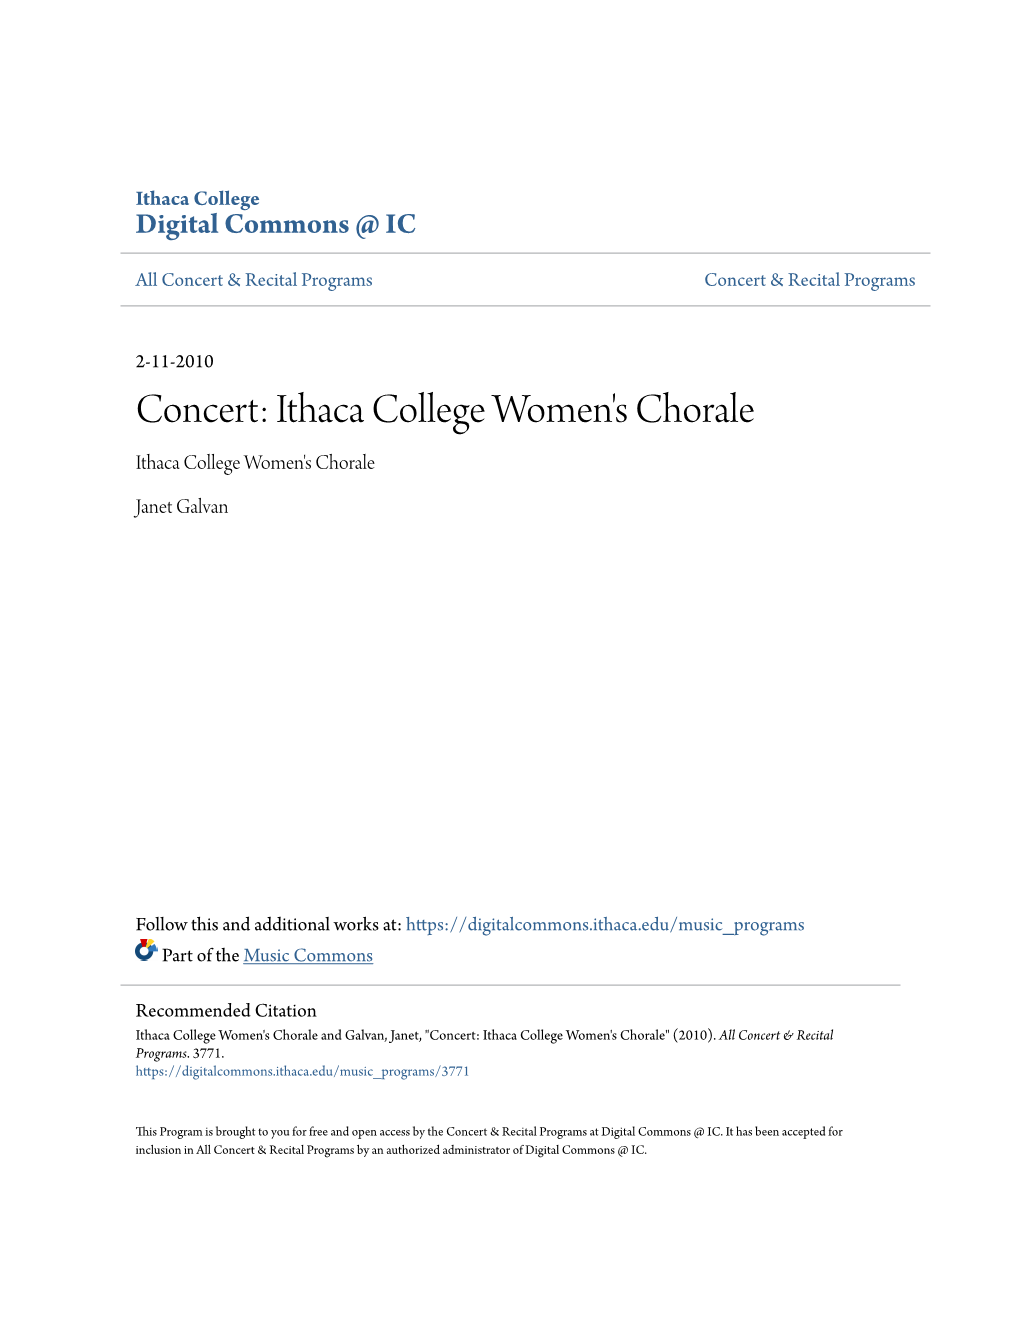 Ithaca College Women's Chorale Ithaca College Women's Chorale